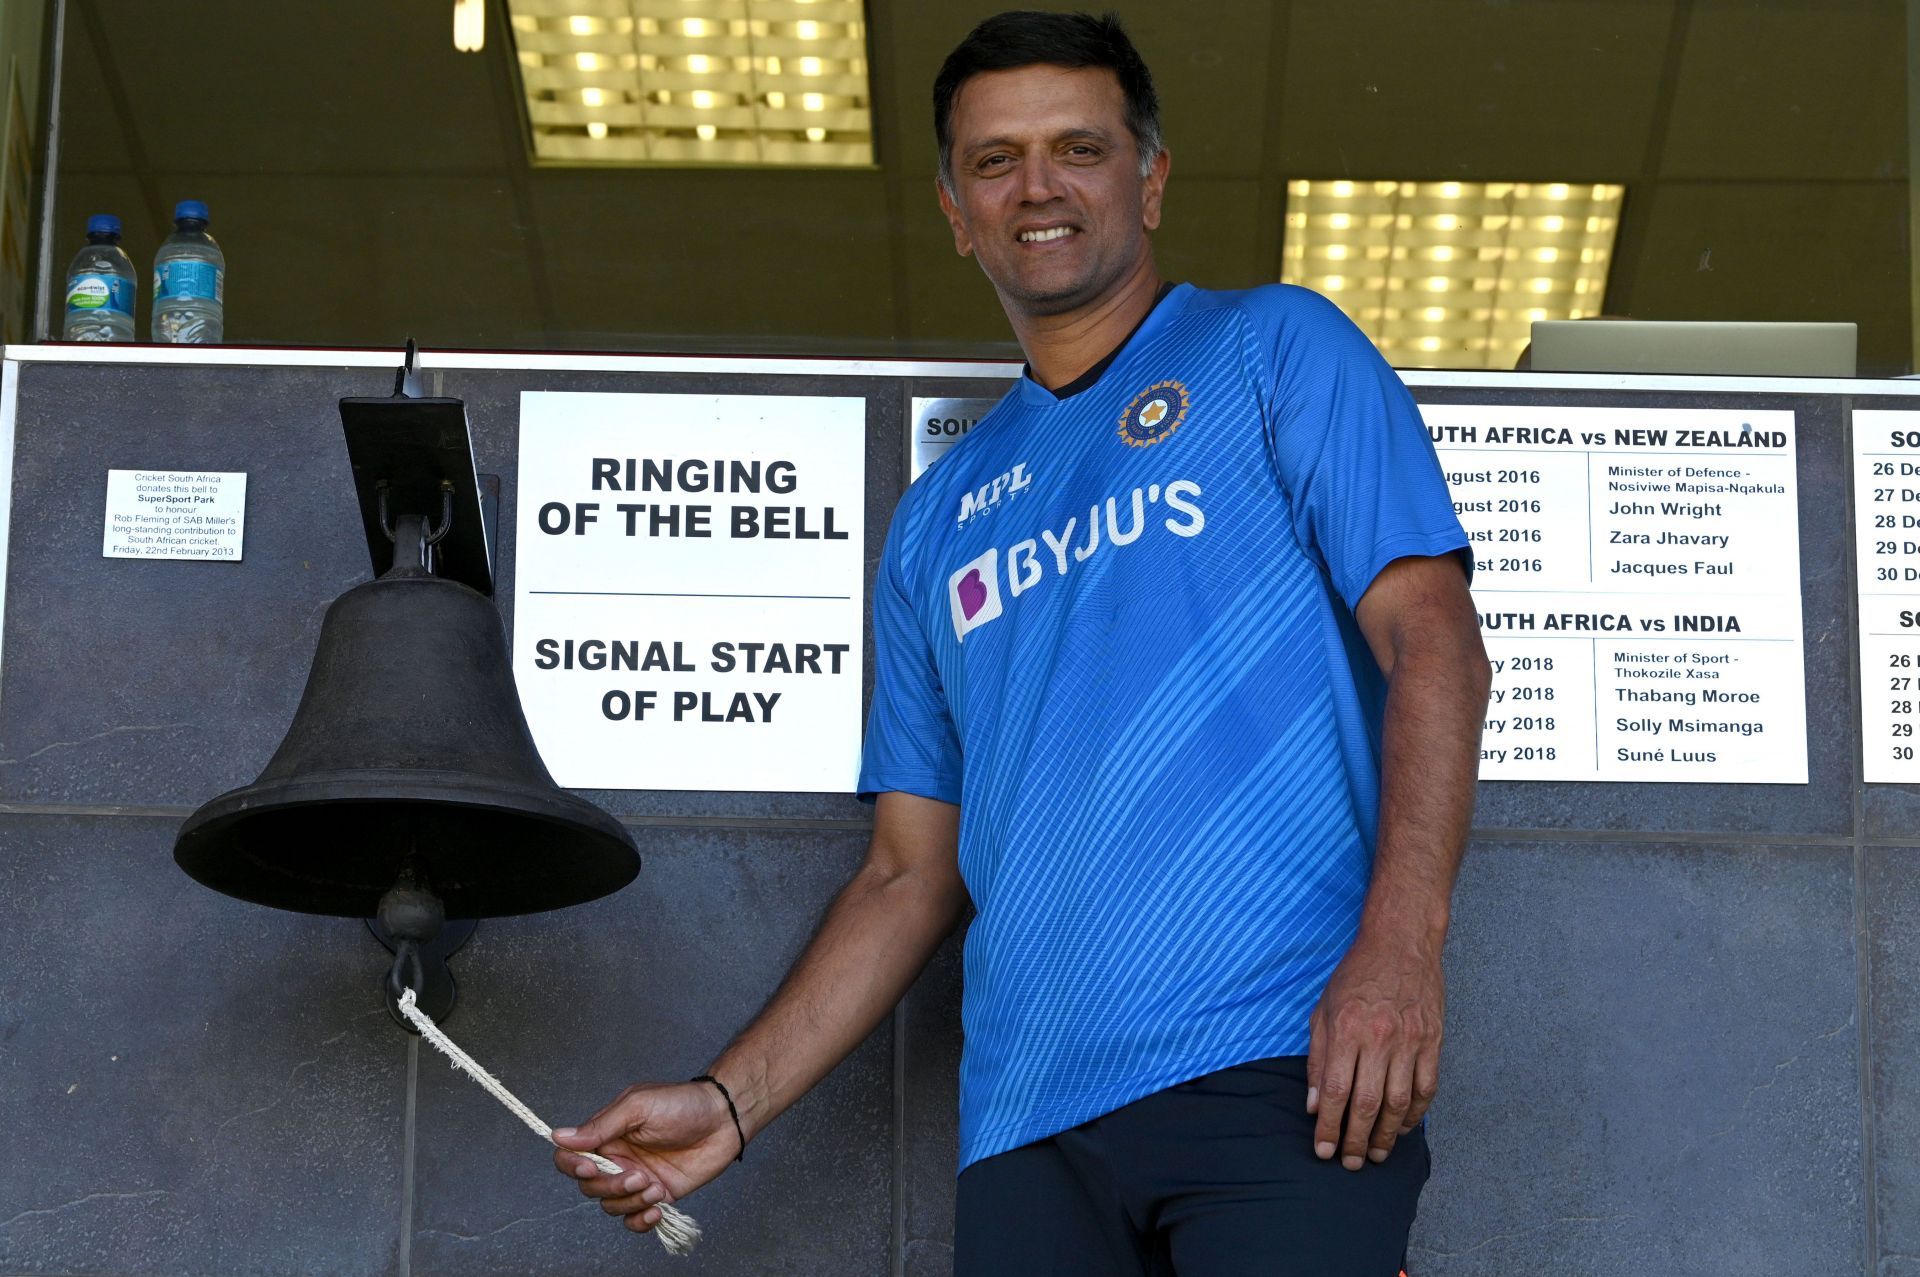 Rahul Dravid is now the head coach of the Indian cricket team